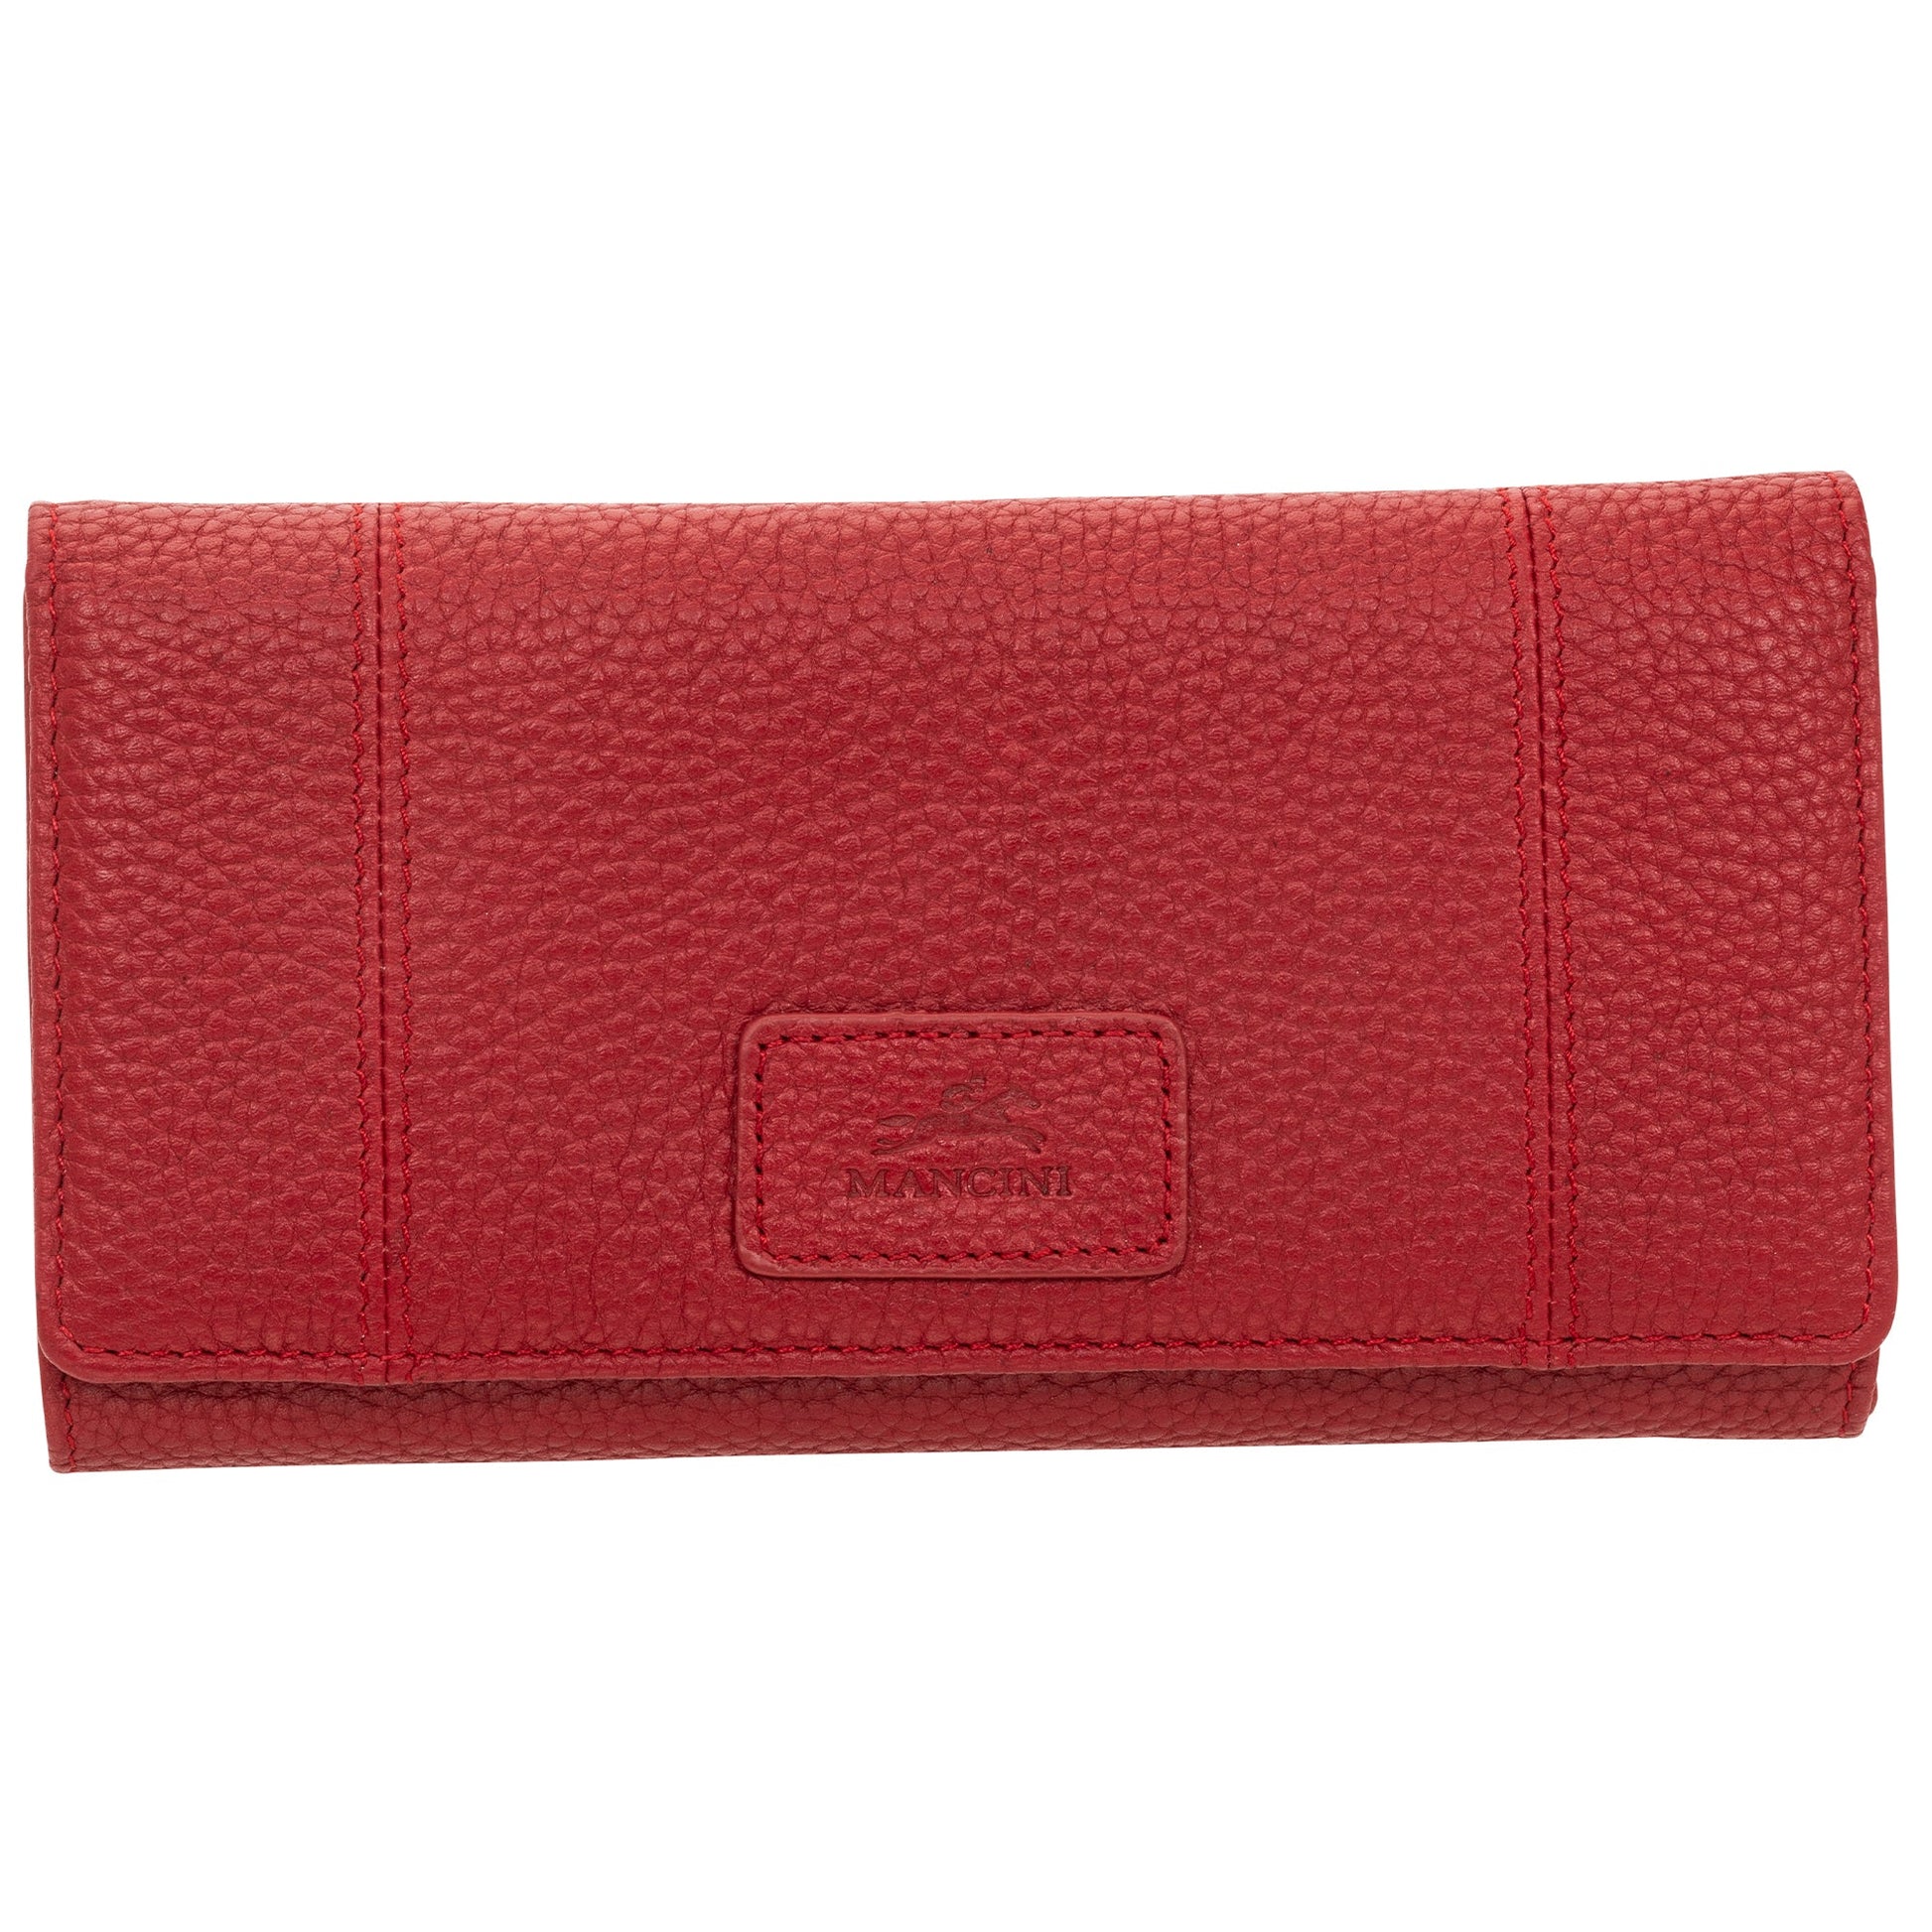 Mancini PEBBLE RFID Trifold Wallet - Red